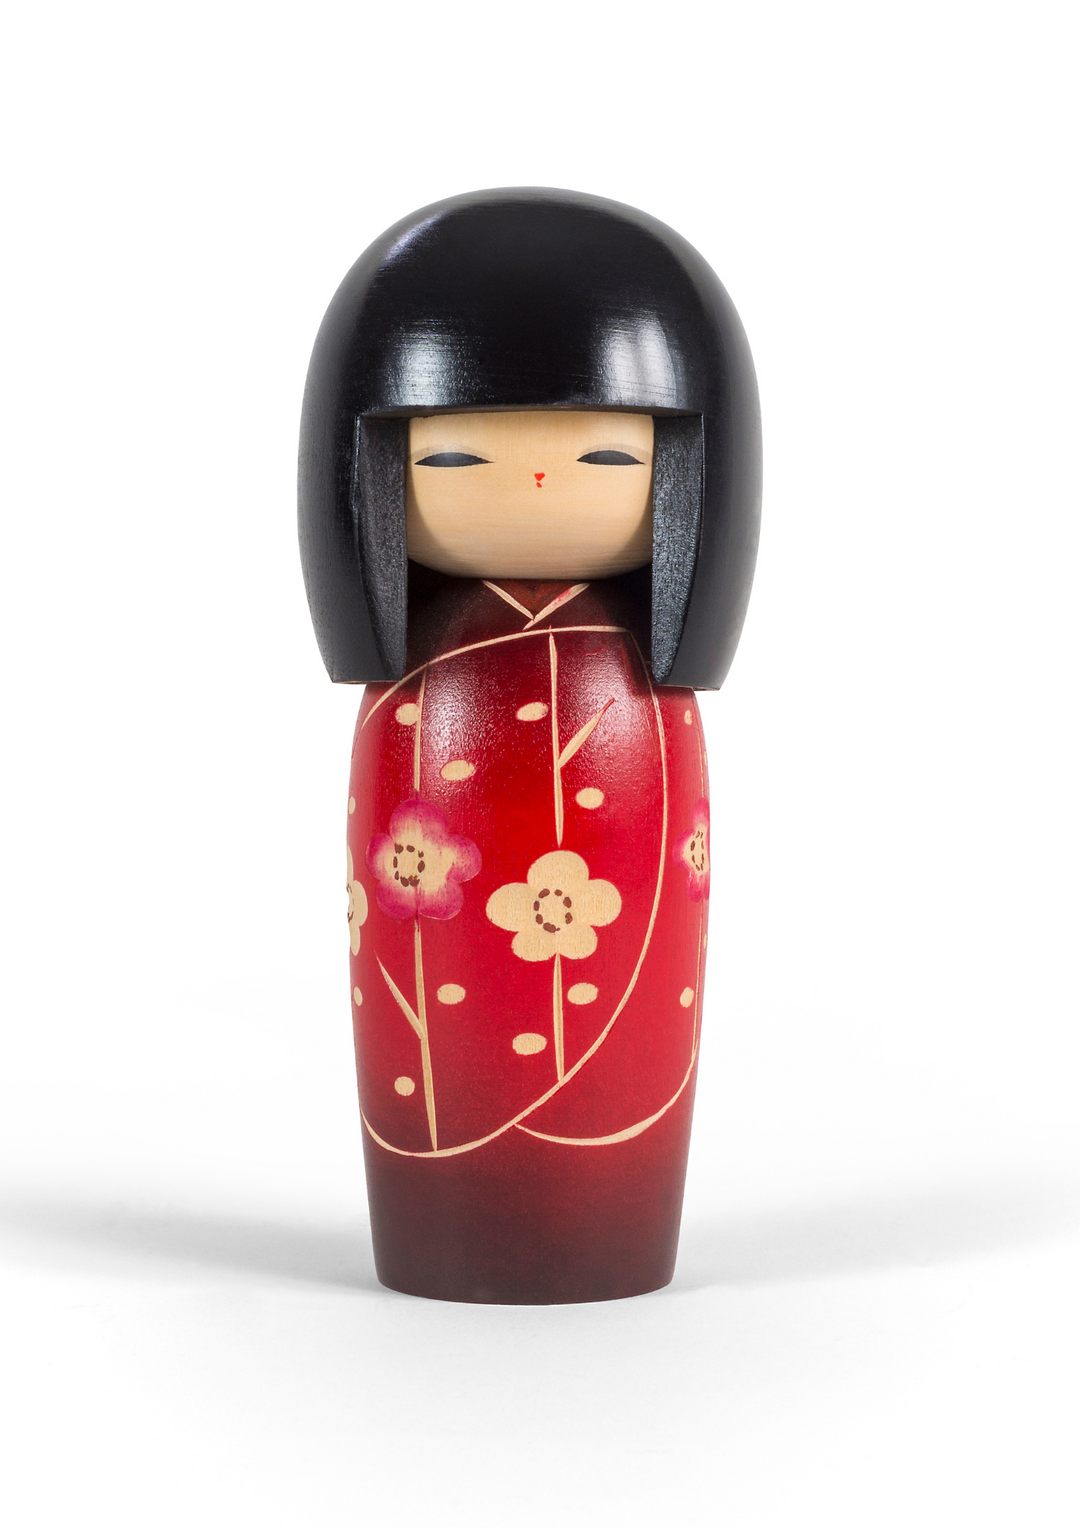 Handcrafted wooden Kokeshi doll representing Japanese culture and artistry.